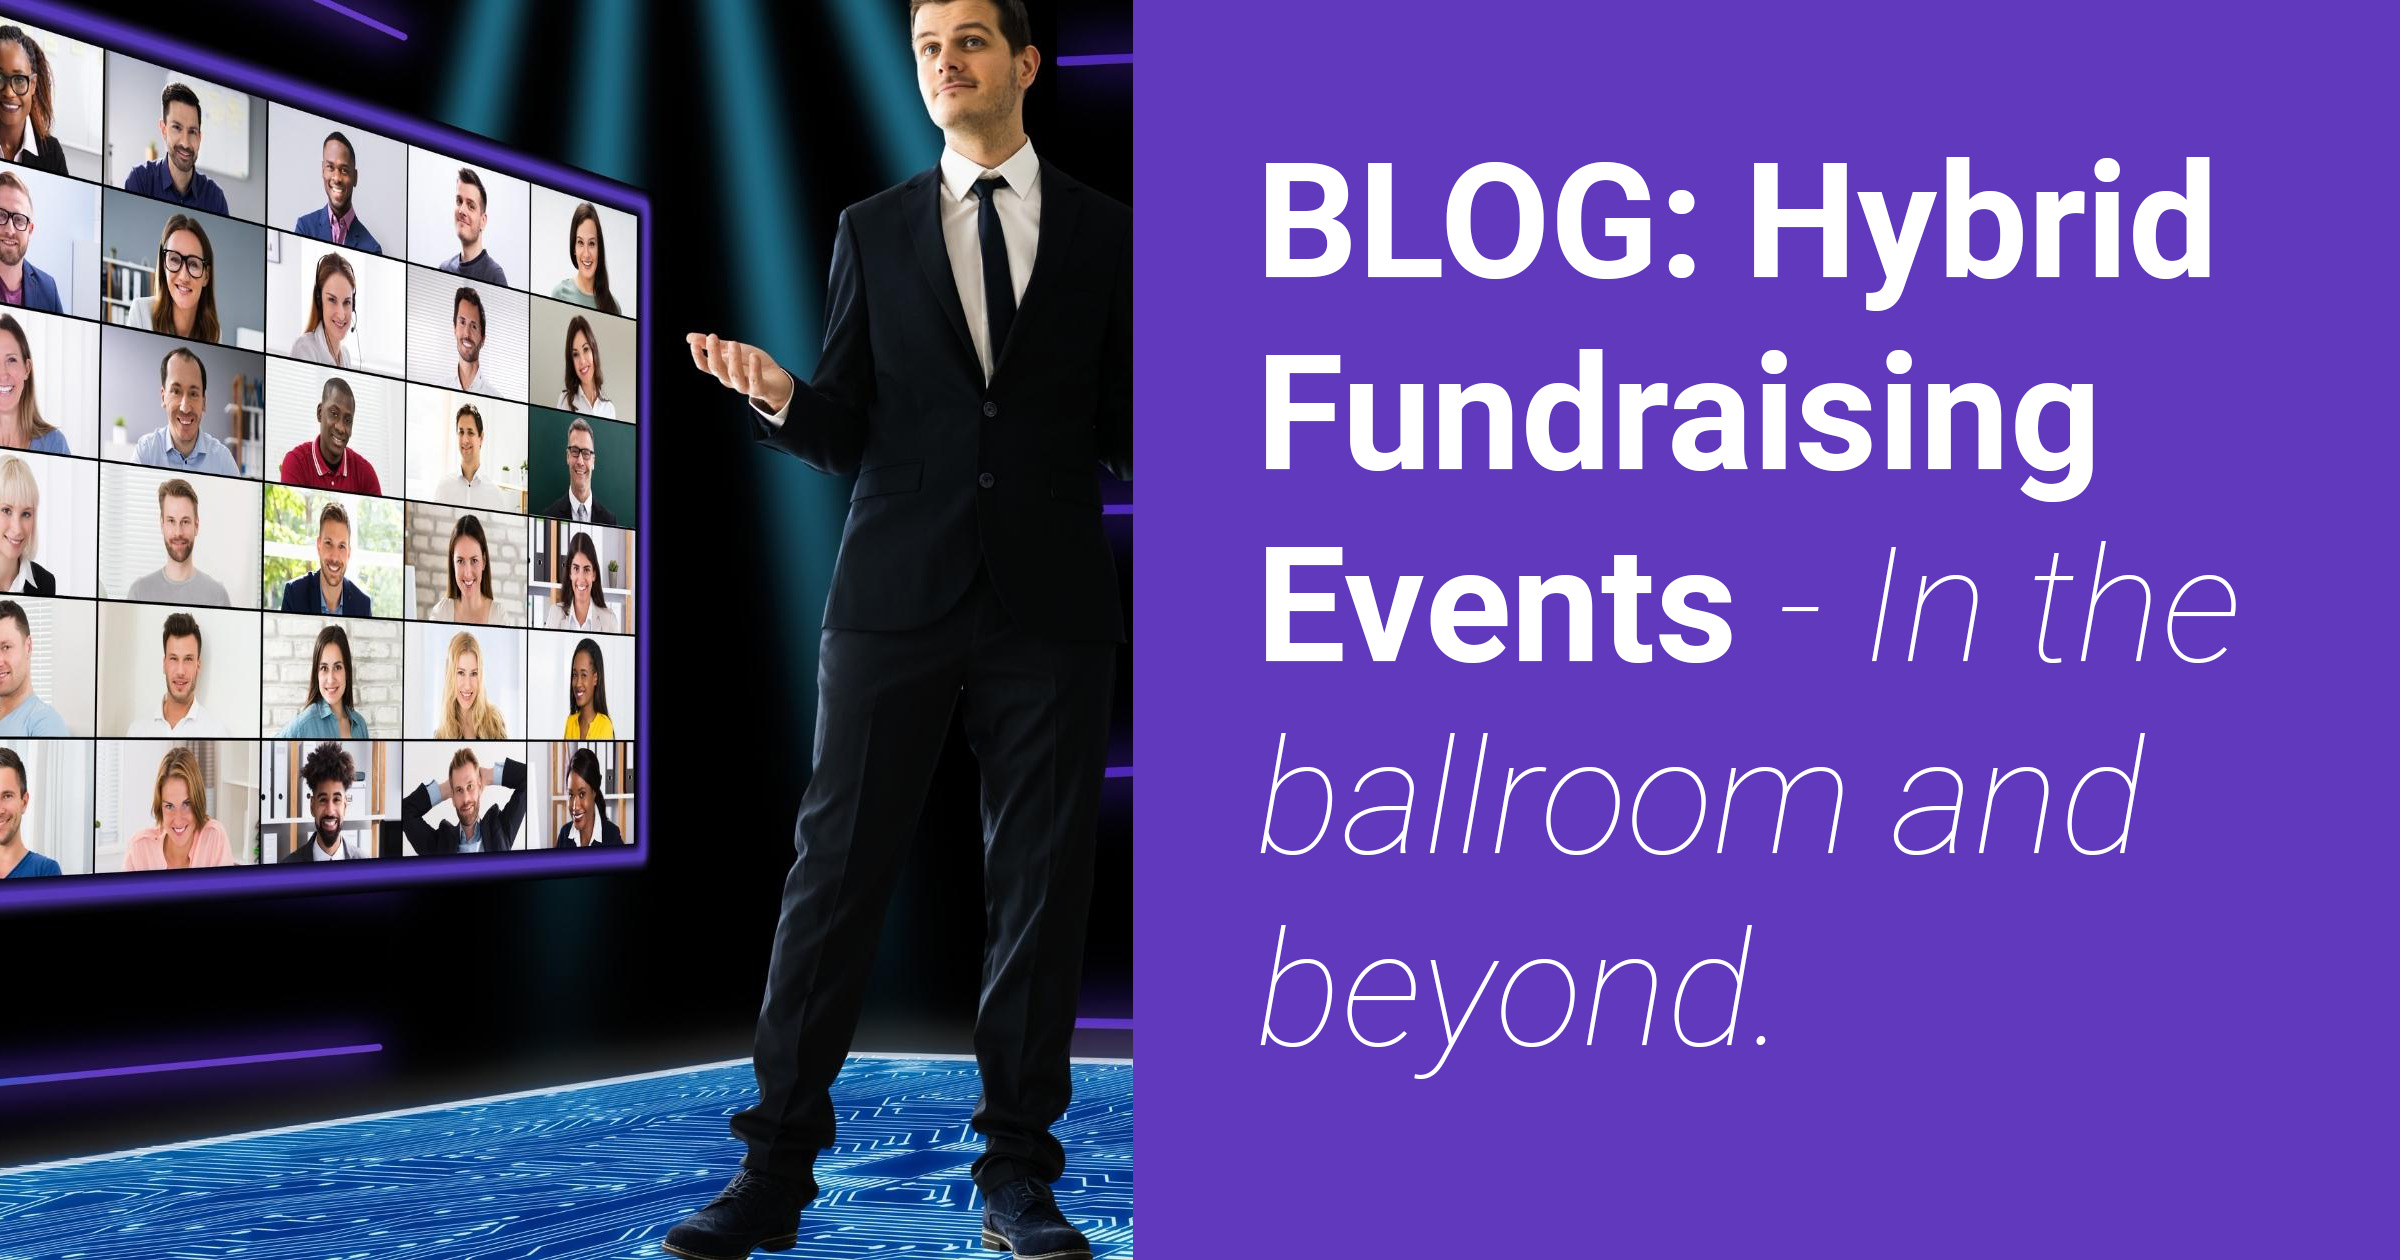 Hybrid Fundraising Events – In the ballroom and beyond